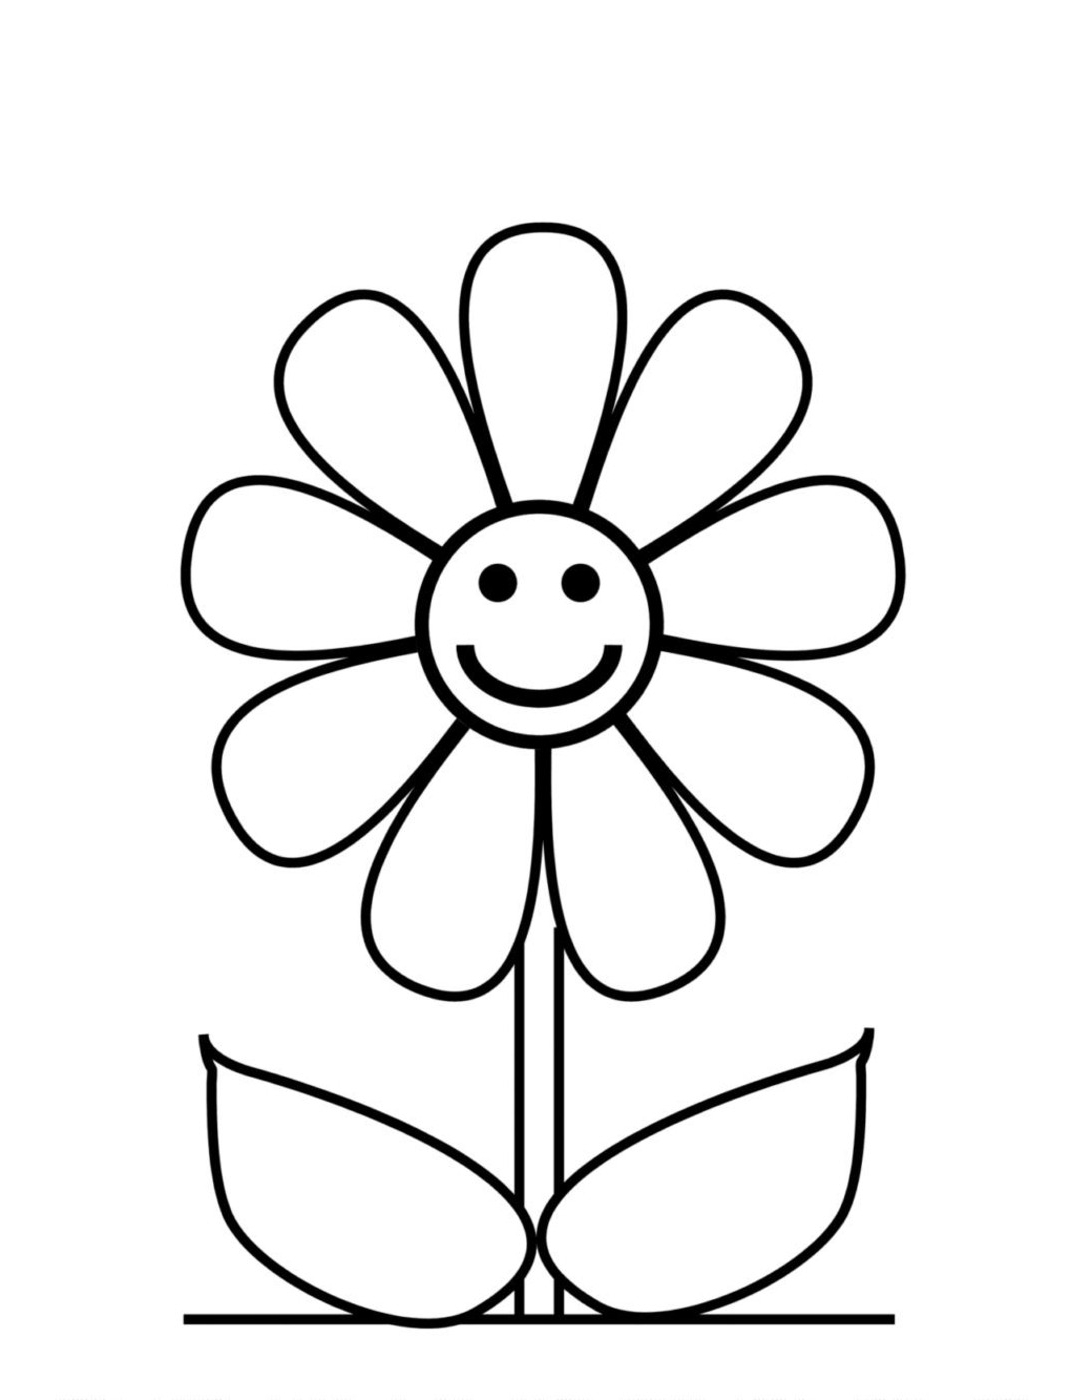 Easy Cute Flower Drawings - Drawing And Sketches